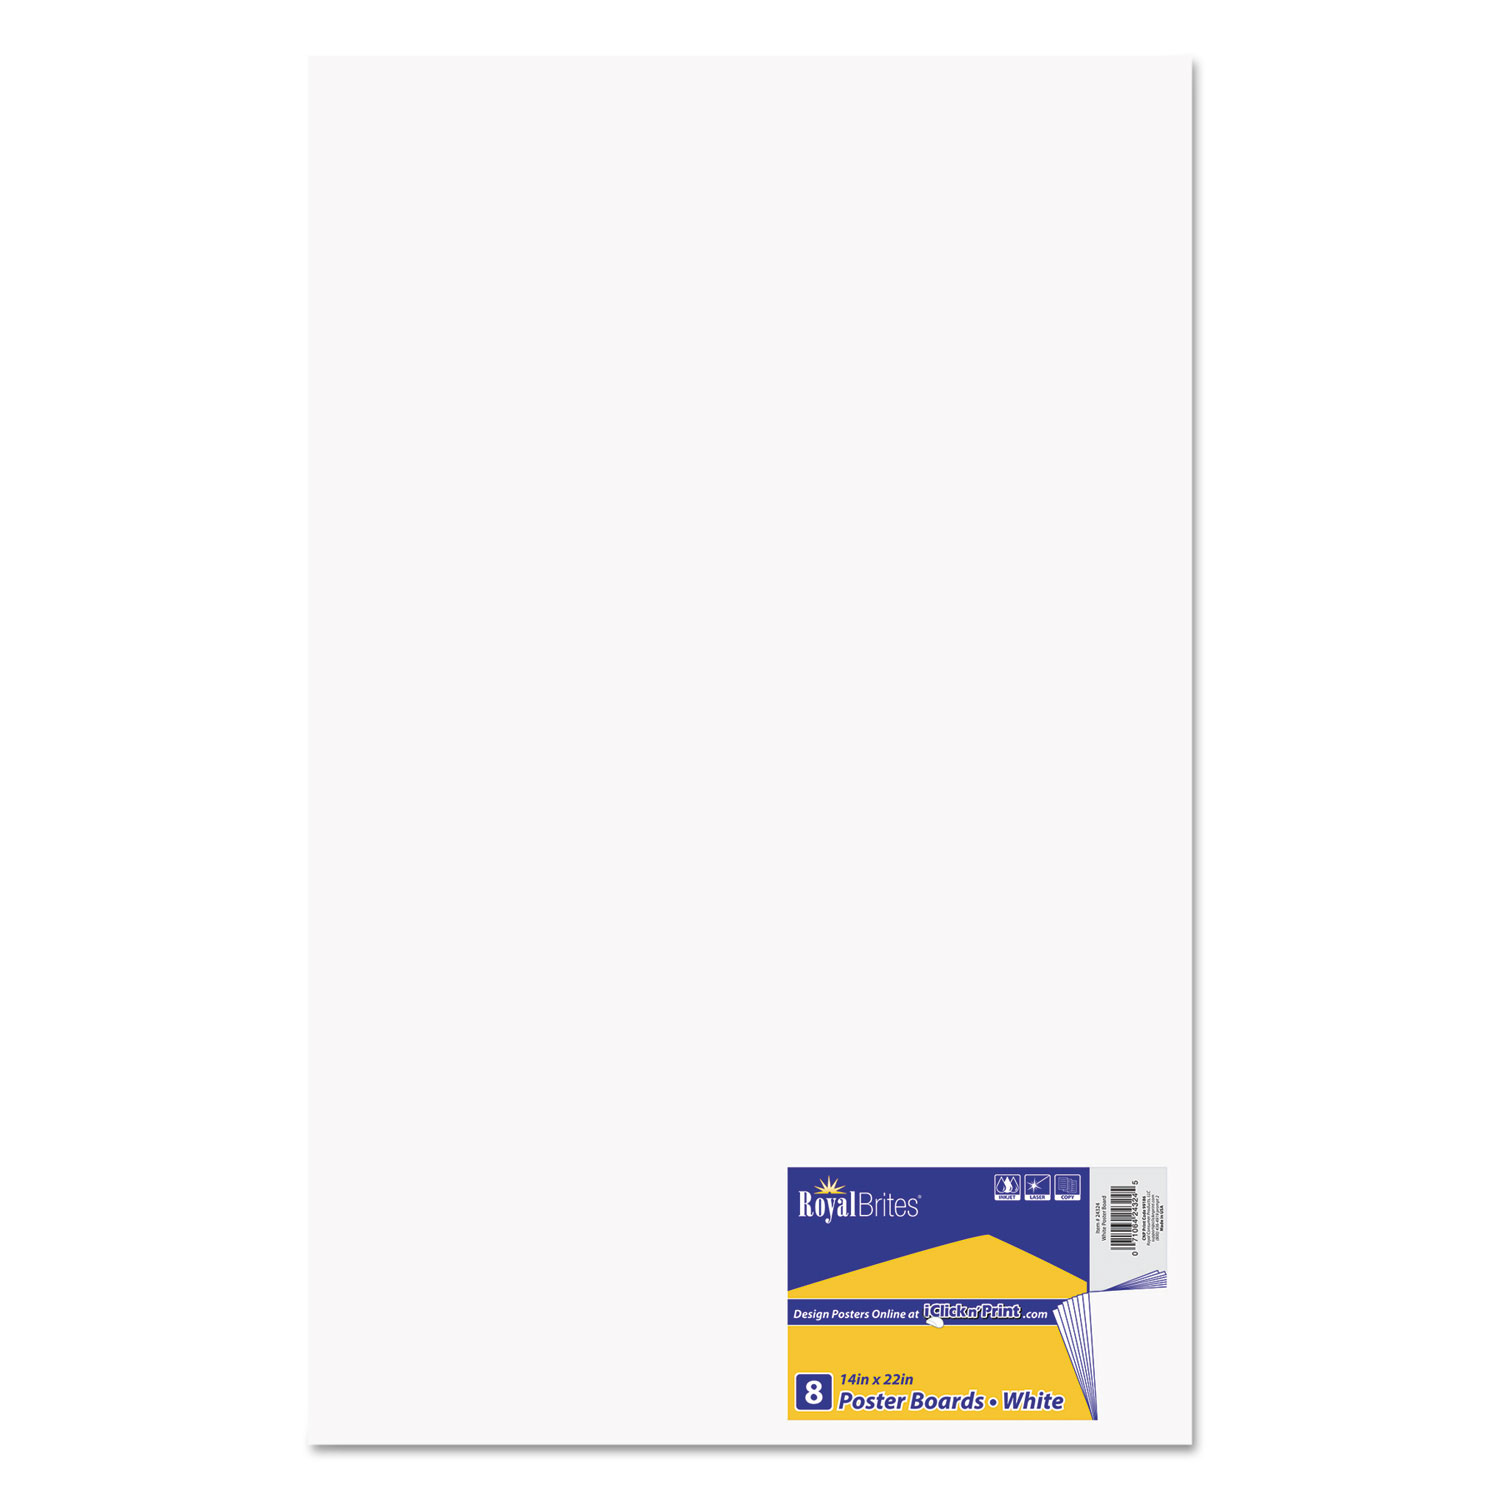 Royal Brites White Heavyweight Poster Board, 22 x 28 in - Kroger